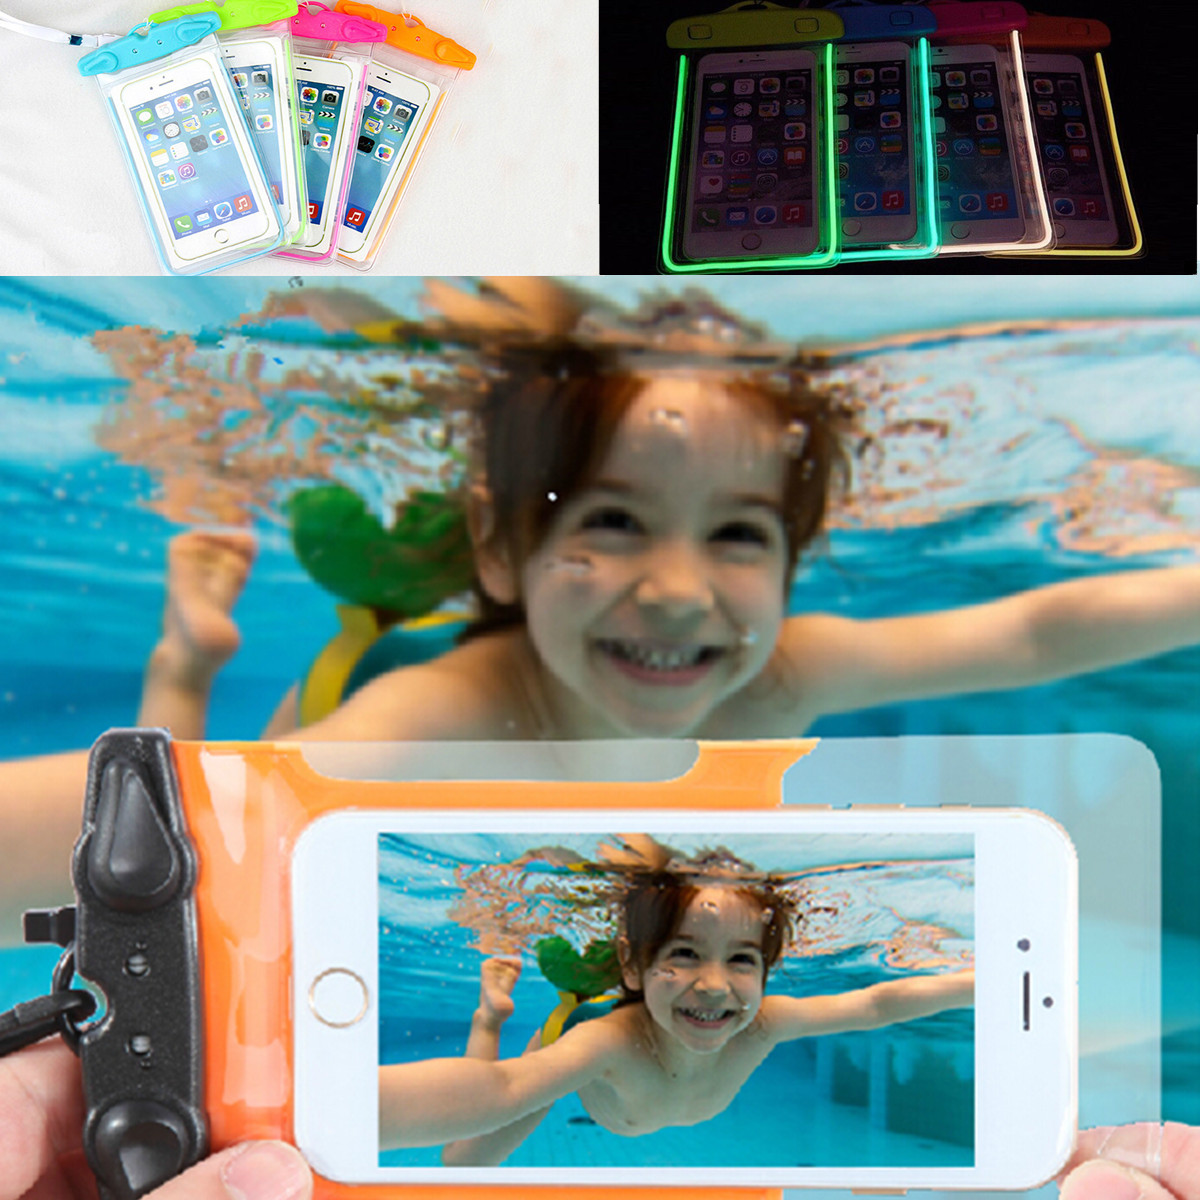 Universal-Waterproof-Fluorescent-Under-Water-Pouch-Case-Cover-For-Mobile-Phones-1003177-2